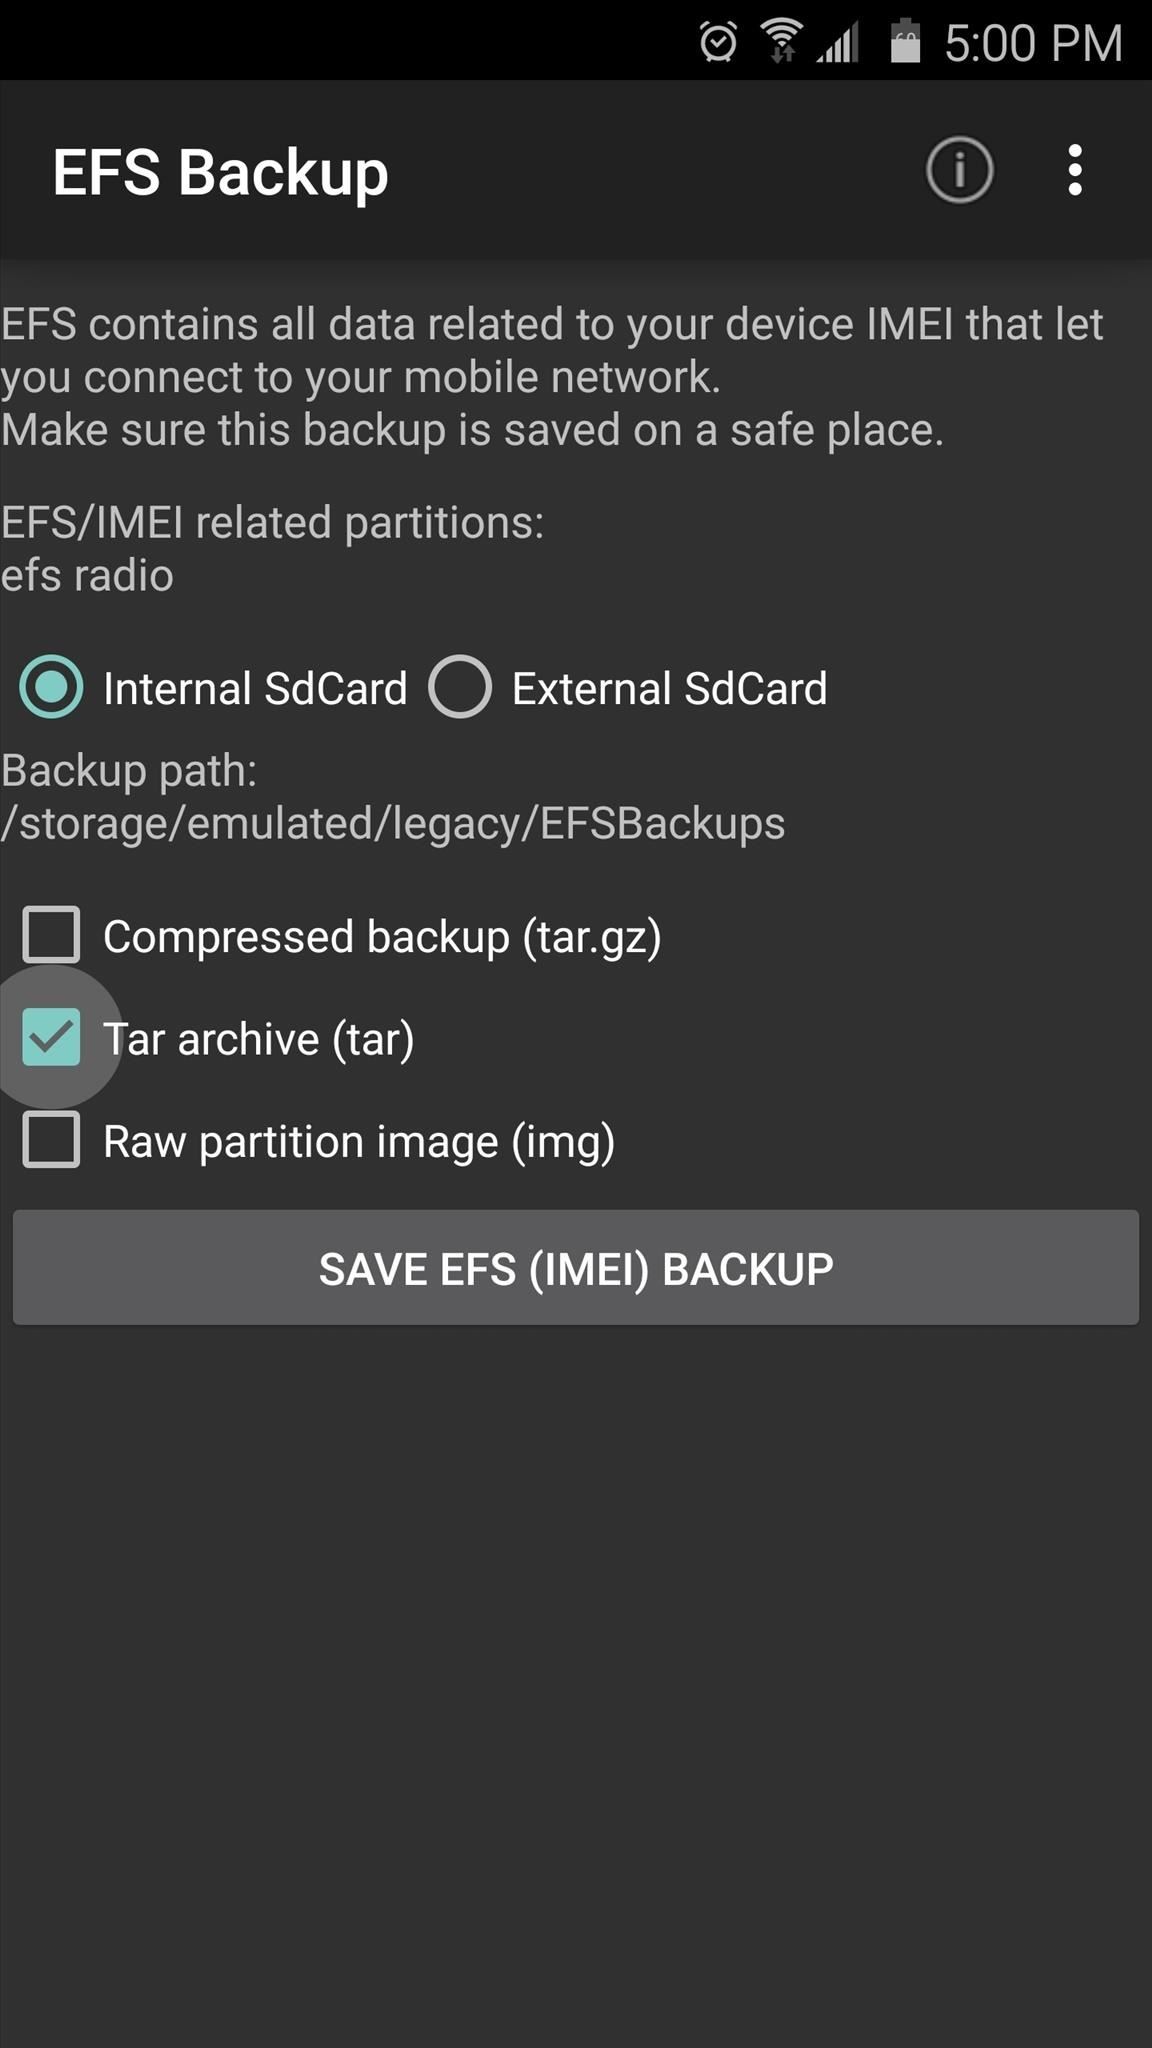 Prevent Bricks by Backing Up the EFS Partition on Your Samsung Galaxy S6